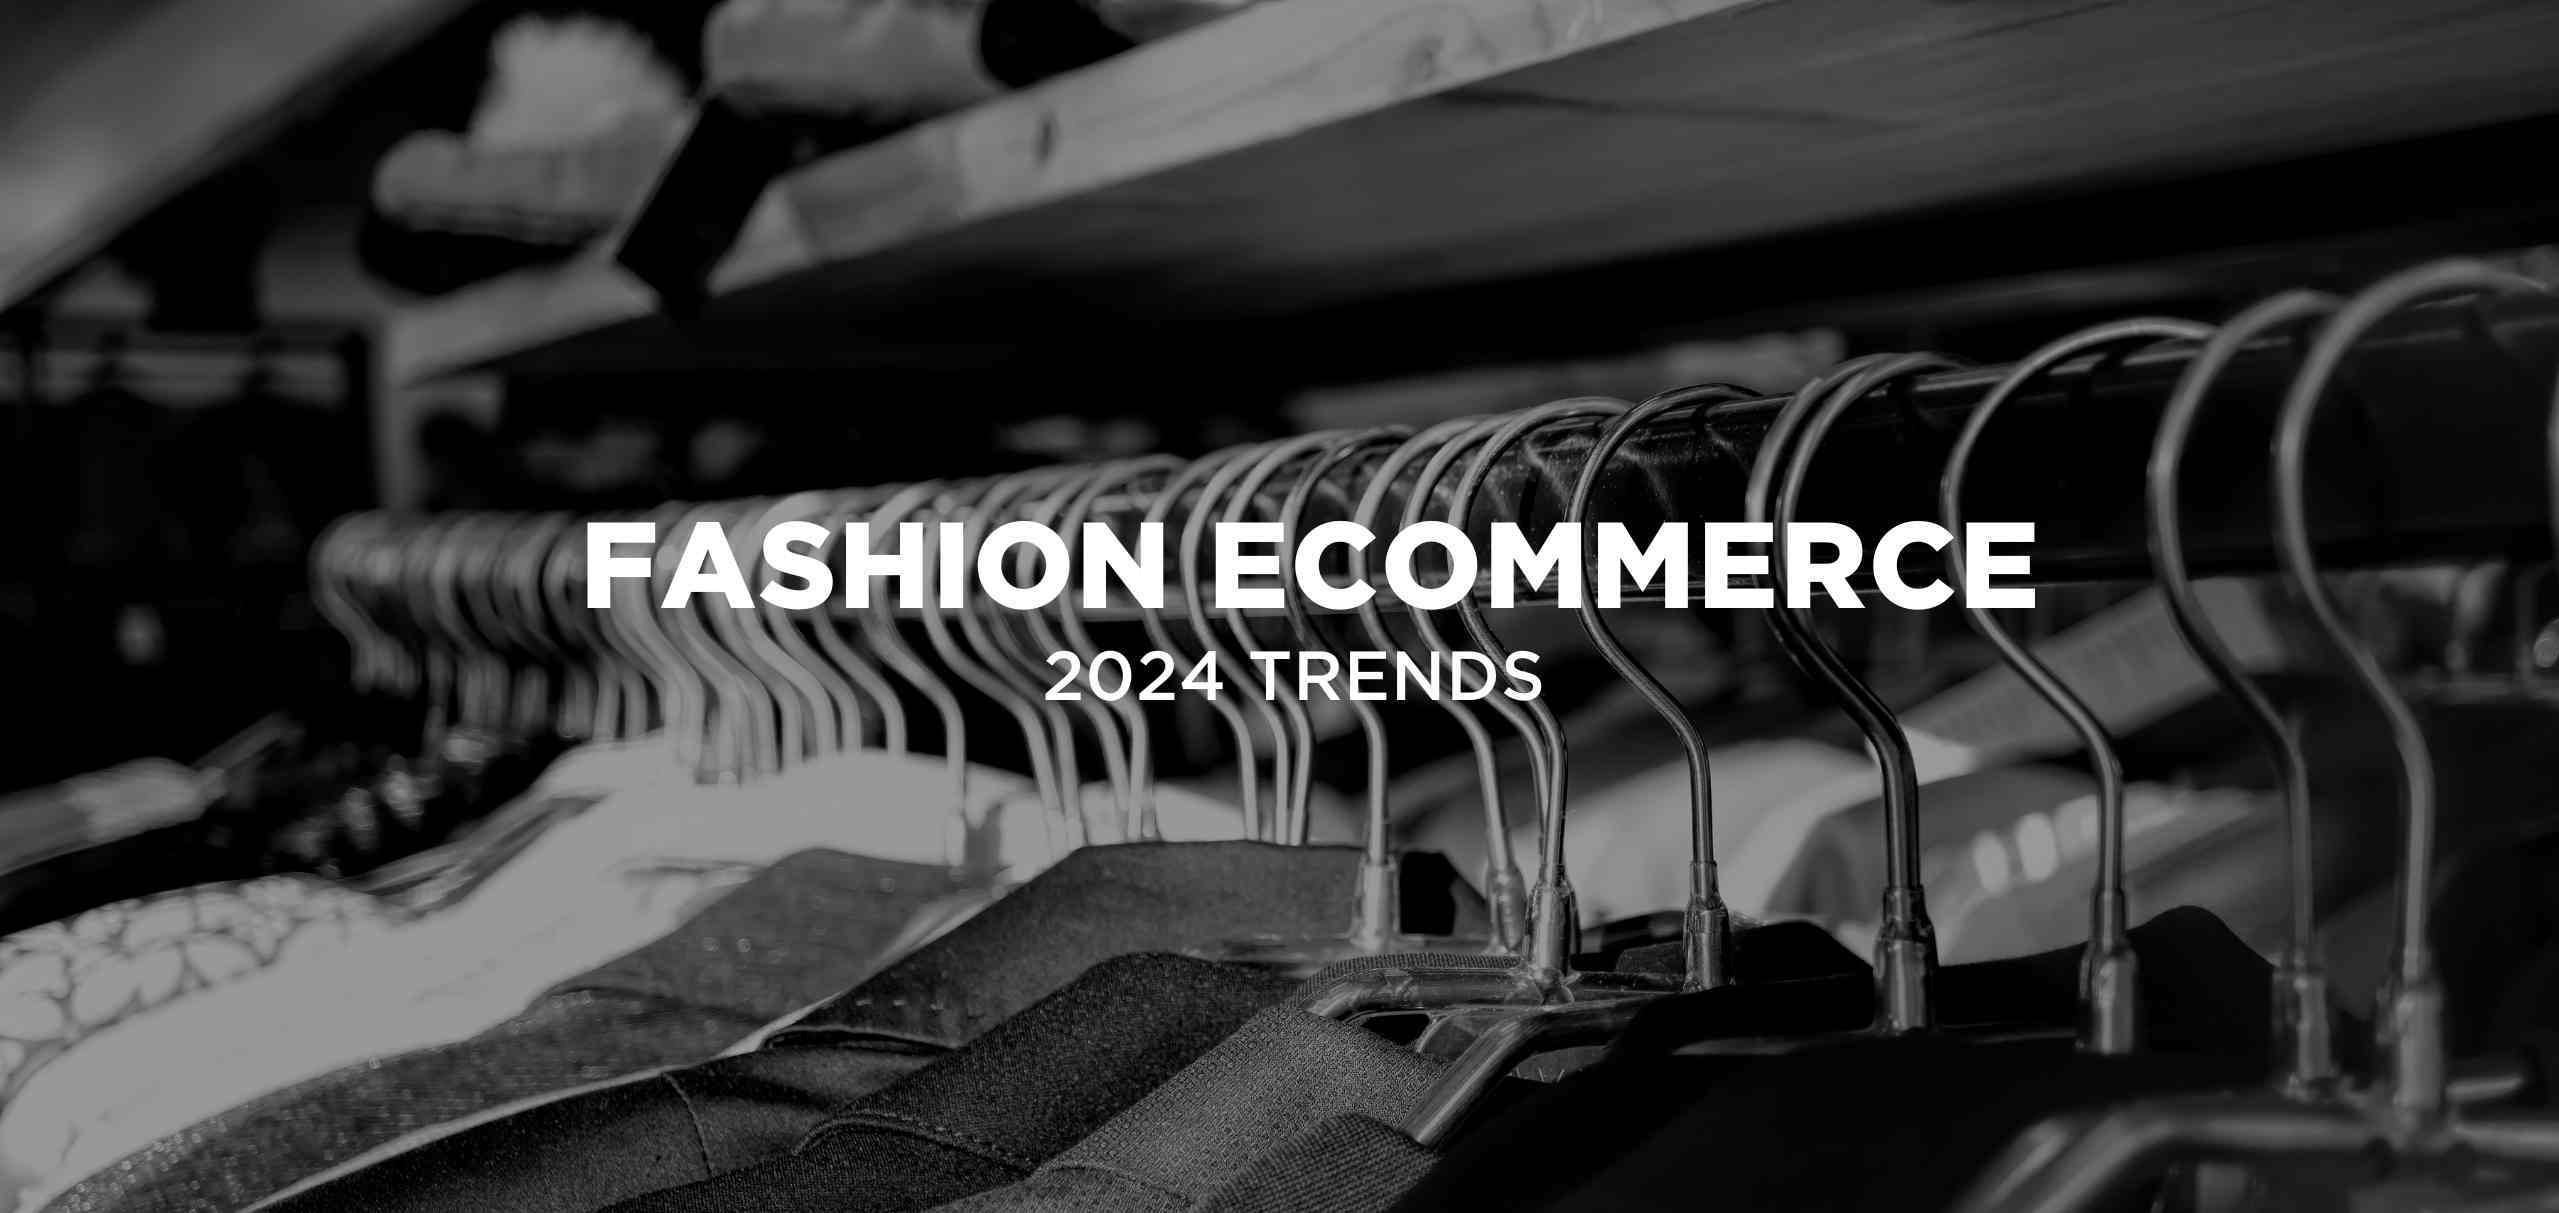 Fashion Ecommerce Trends in 2024